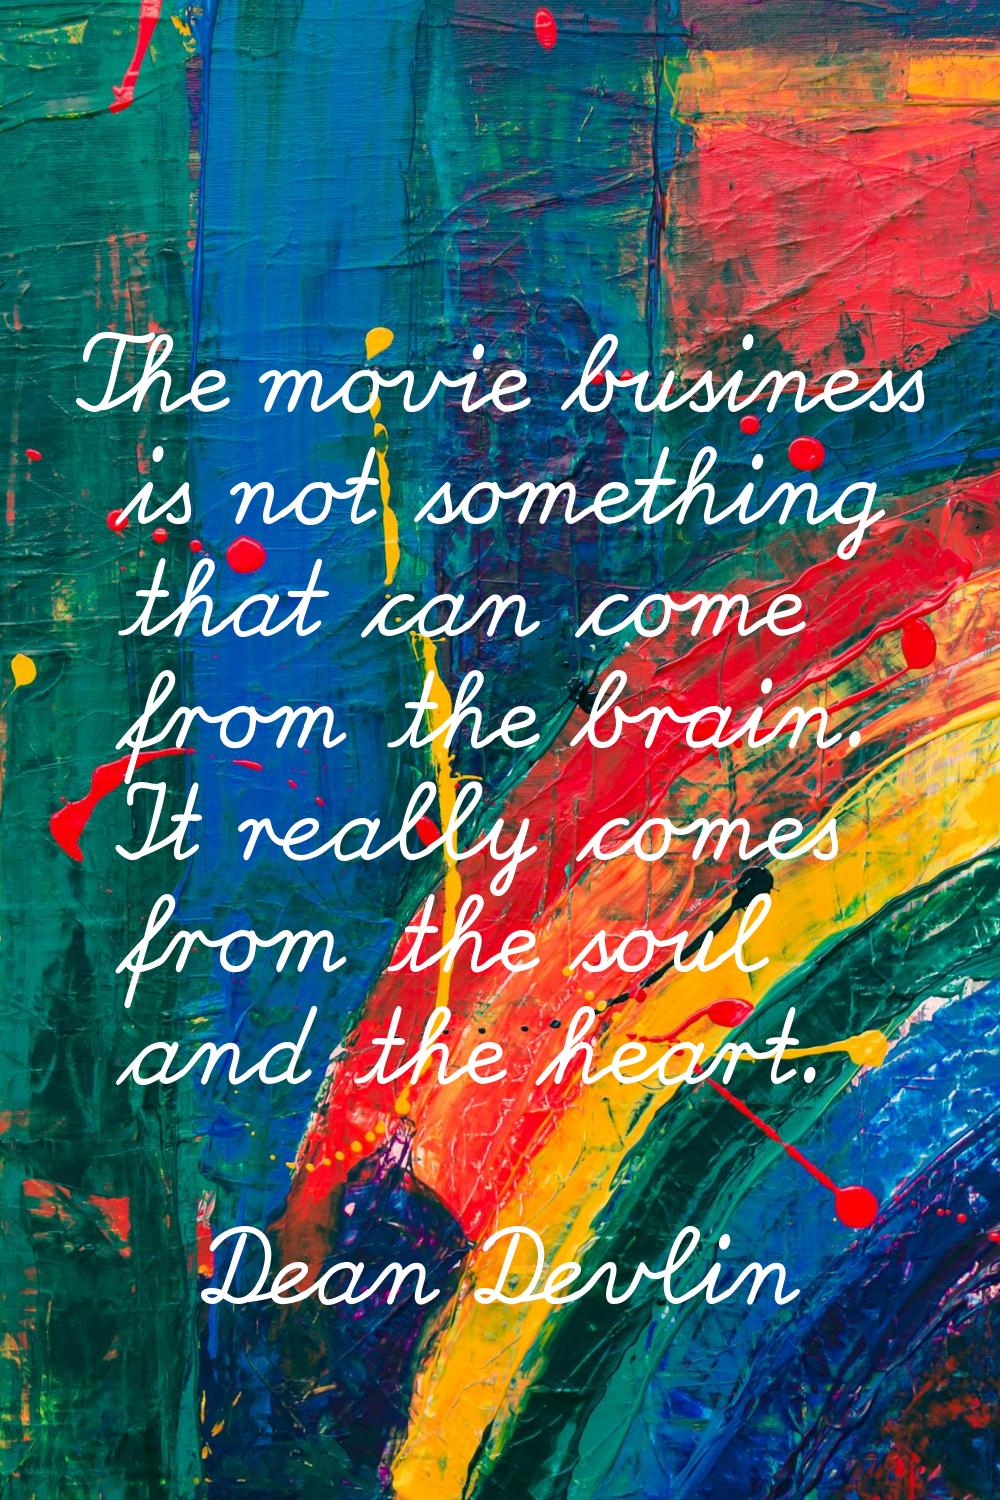 The movie business is not something that can come from the brain. It really comes from the soul and